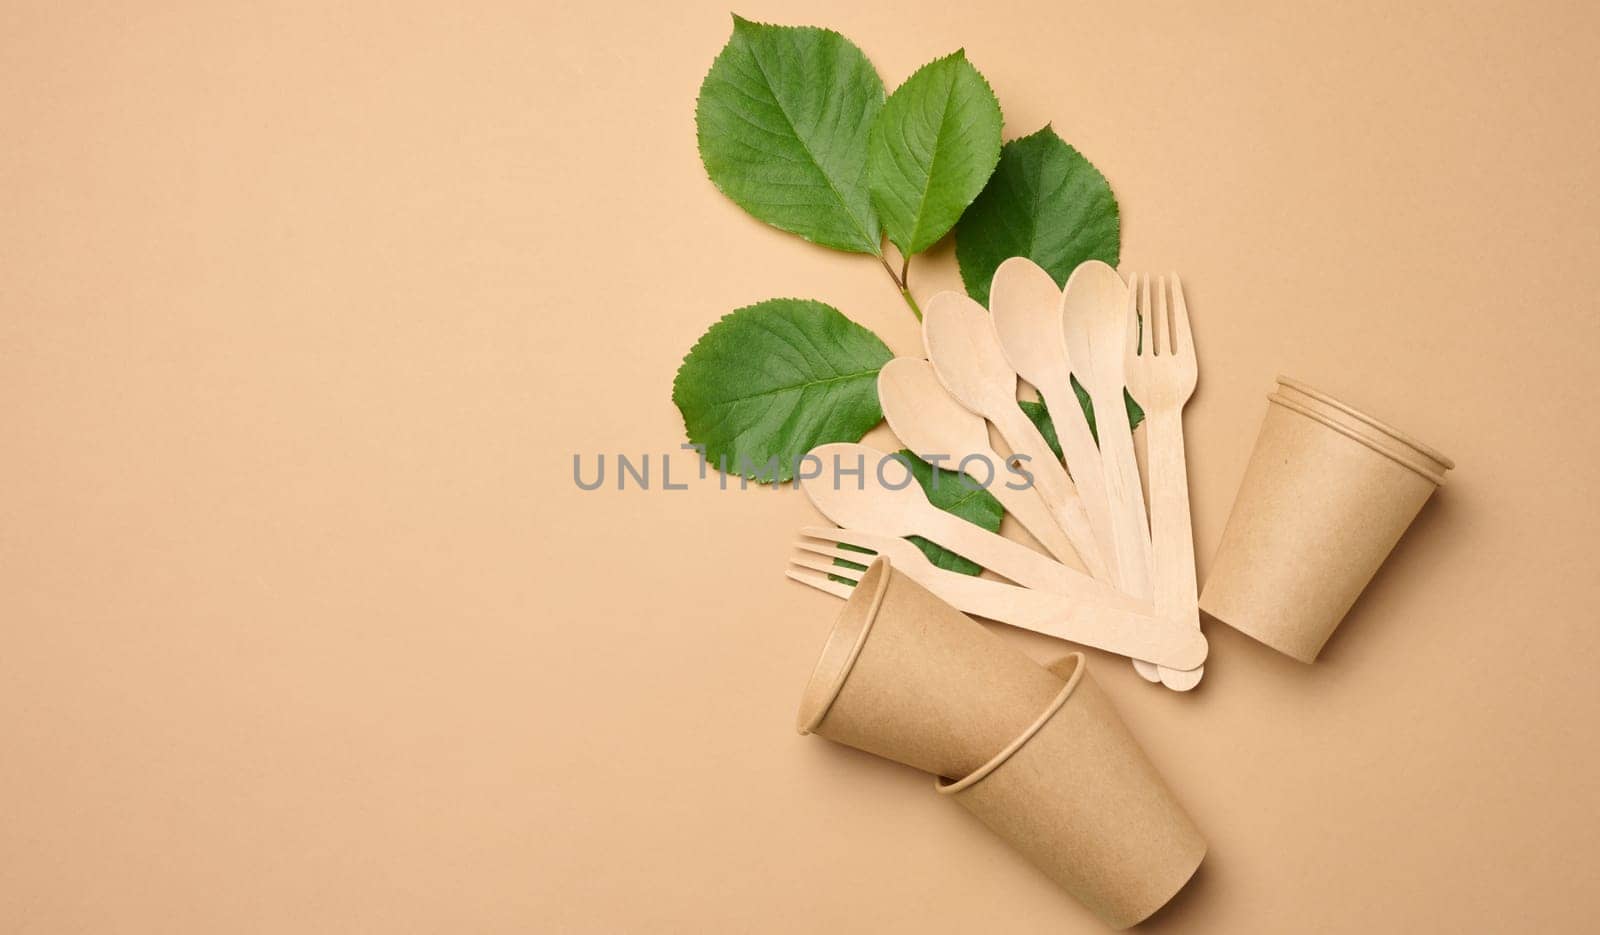 Paper cups, wooden spoons and forks on a beige background, top view